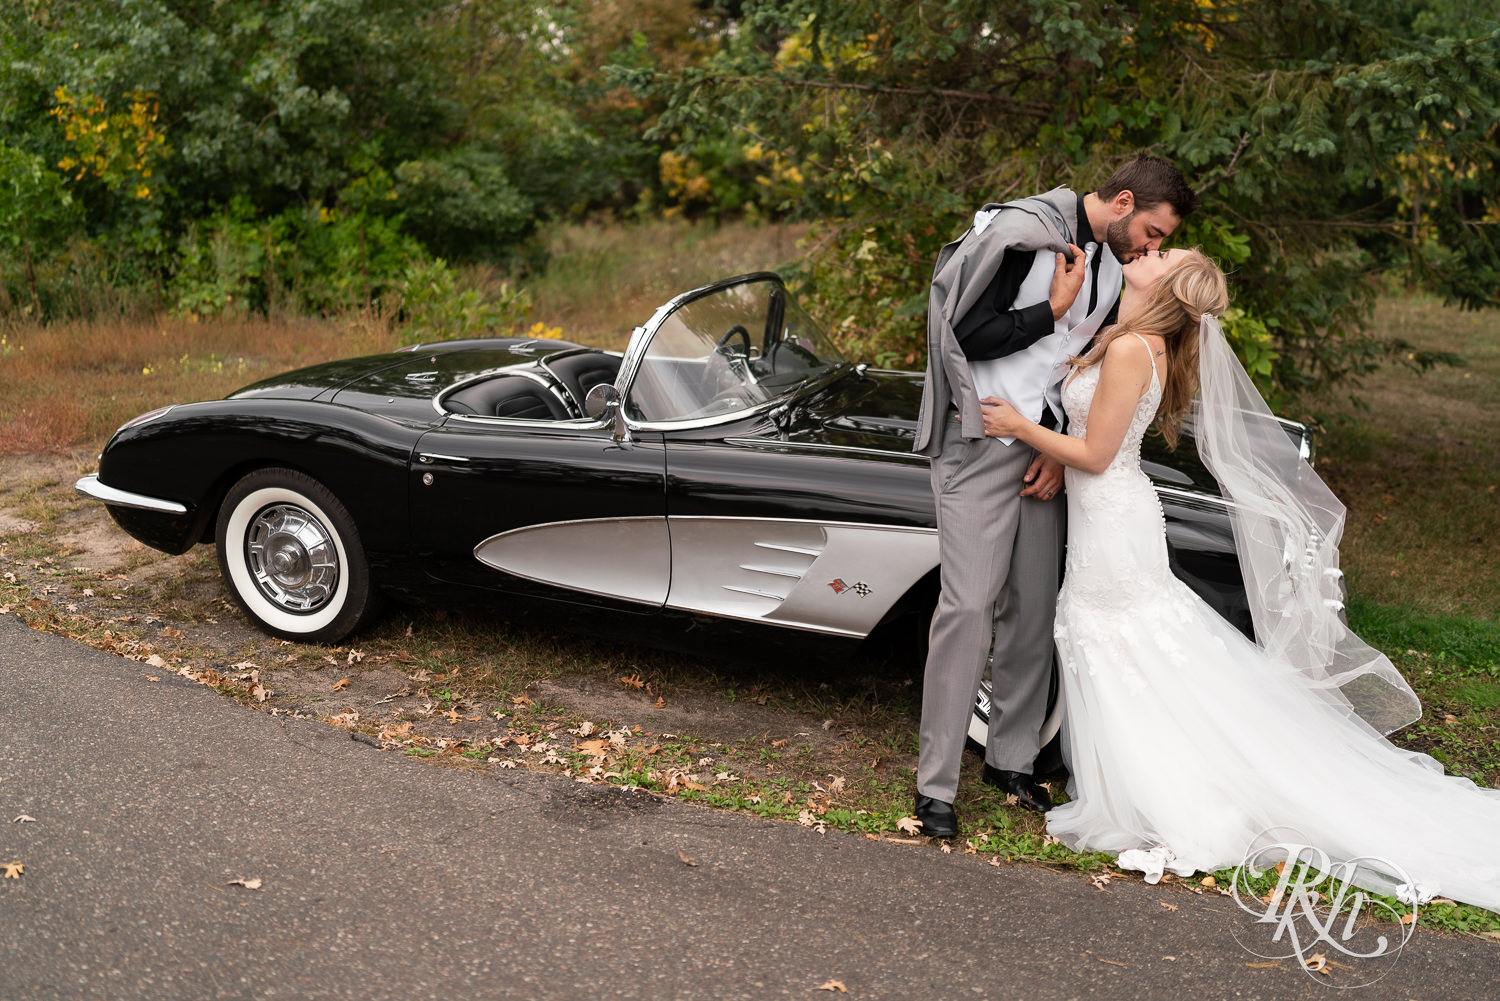 Bride and groom kiss in front of a vintage Corvette at Bunker Hills Event Center in Coon Rapids, Minnesota.